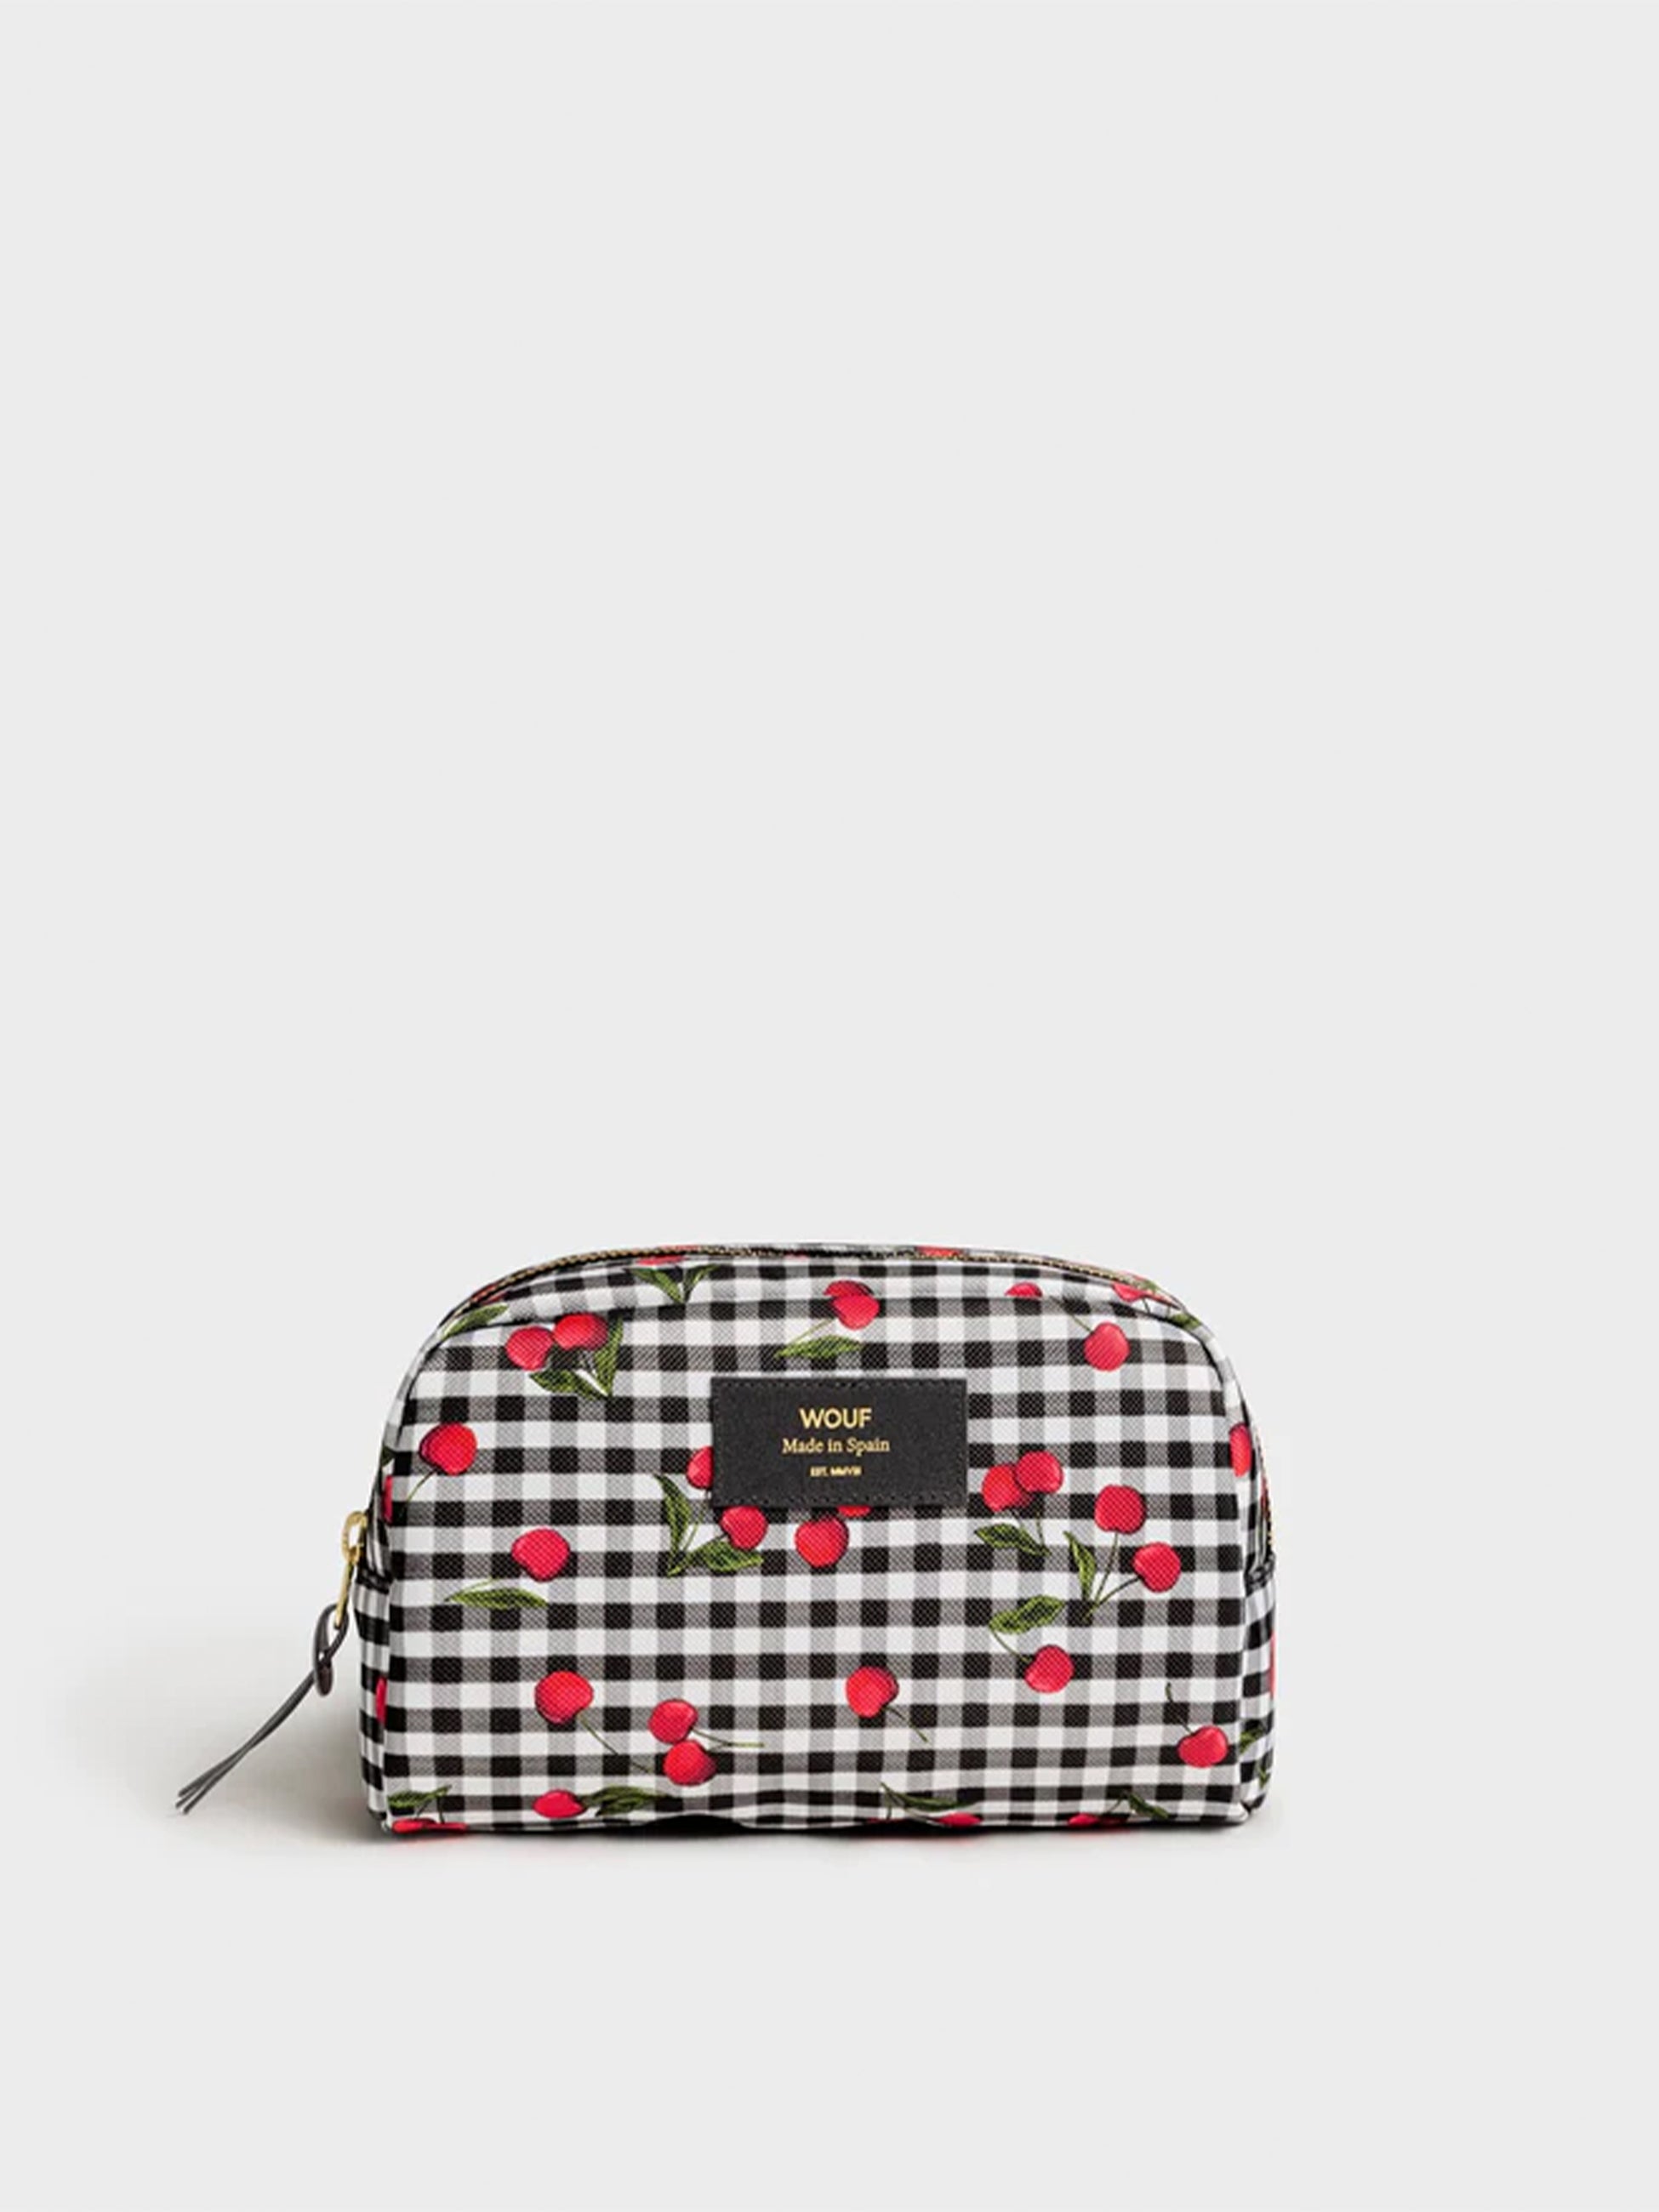 Abril Toiletry Bag